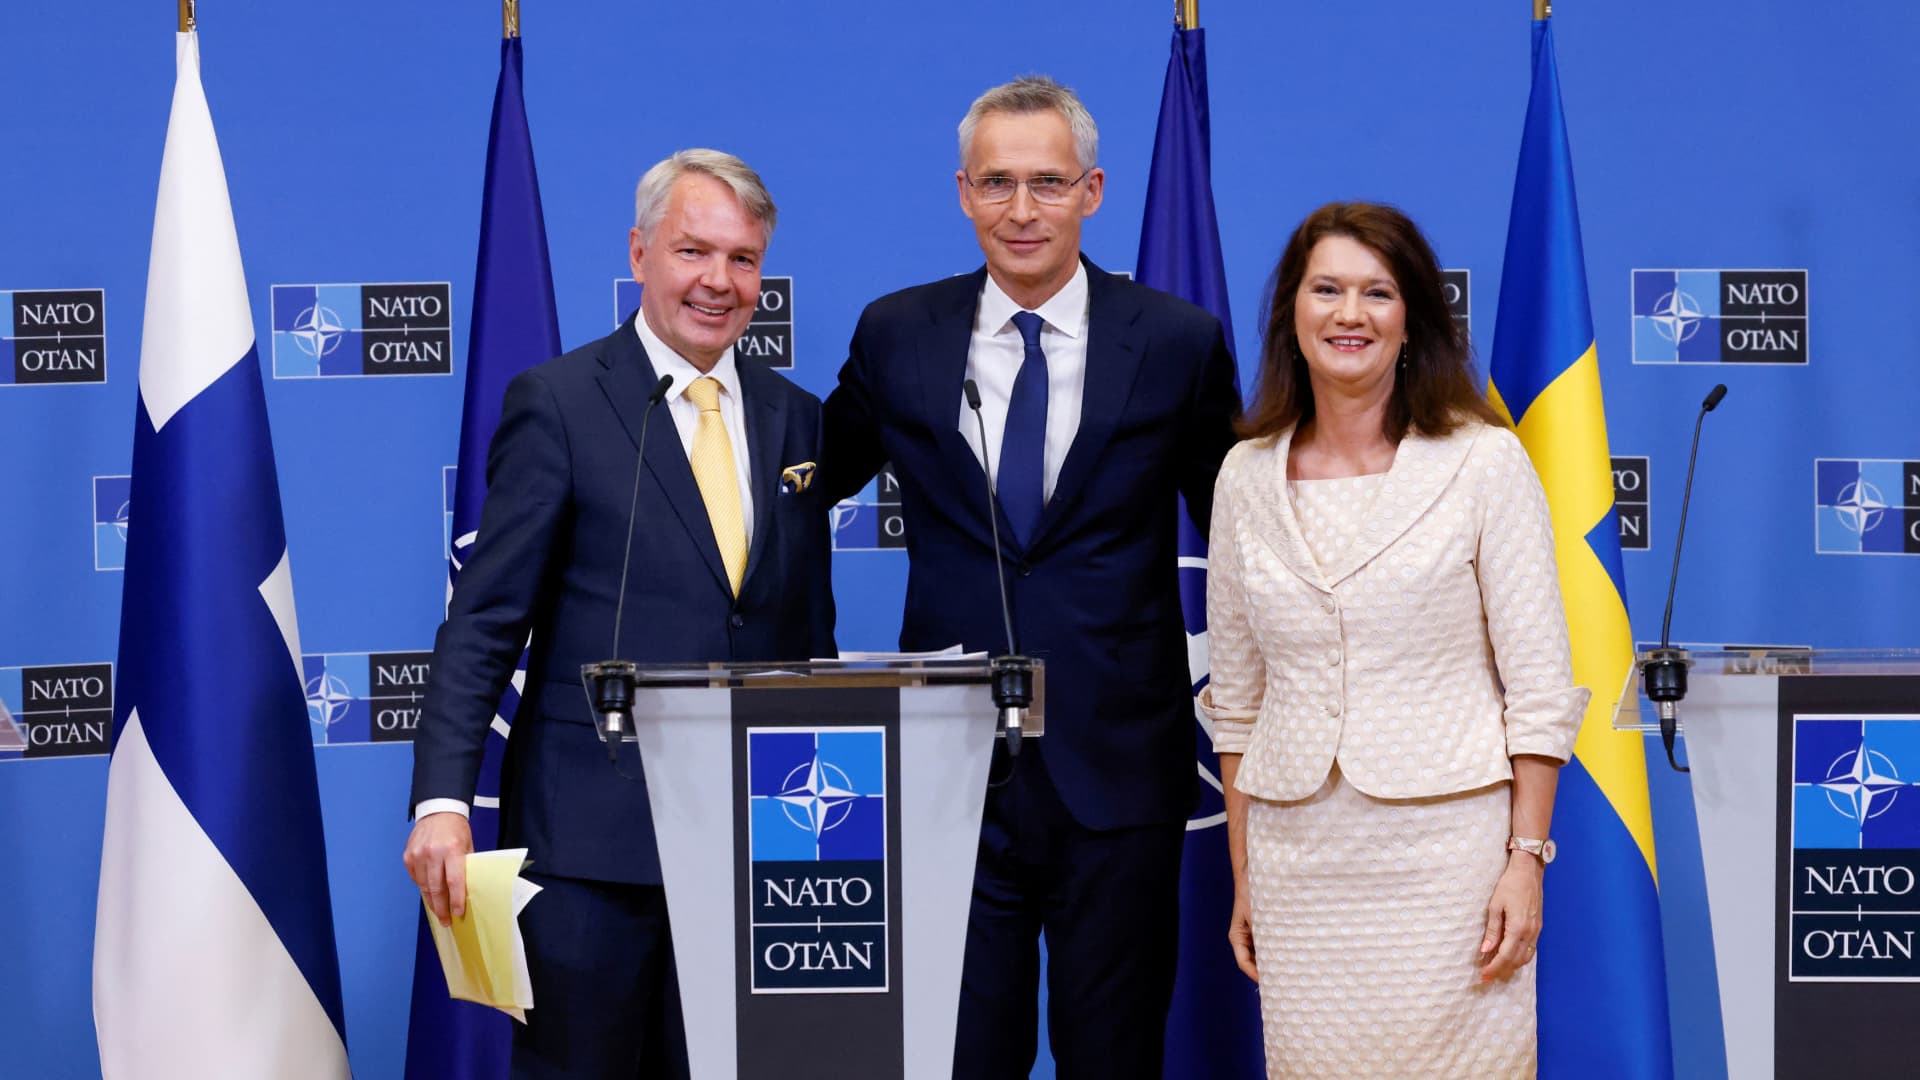 Sweden's Foreign Minister Ann Linde and Finland's Foreign Minister Pekka Haavisto attend a news conference with NATO Secretary General Jens Stoltenberg, after signing their countries' accession protocols at the alliance's headquarters in Brussels, Belgium July 5, 2022.